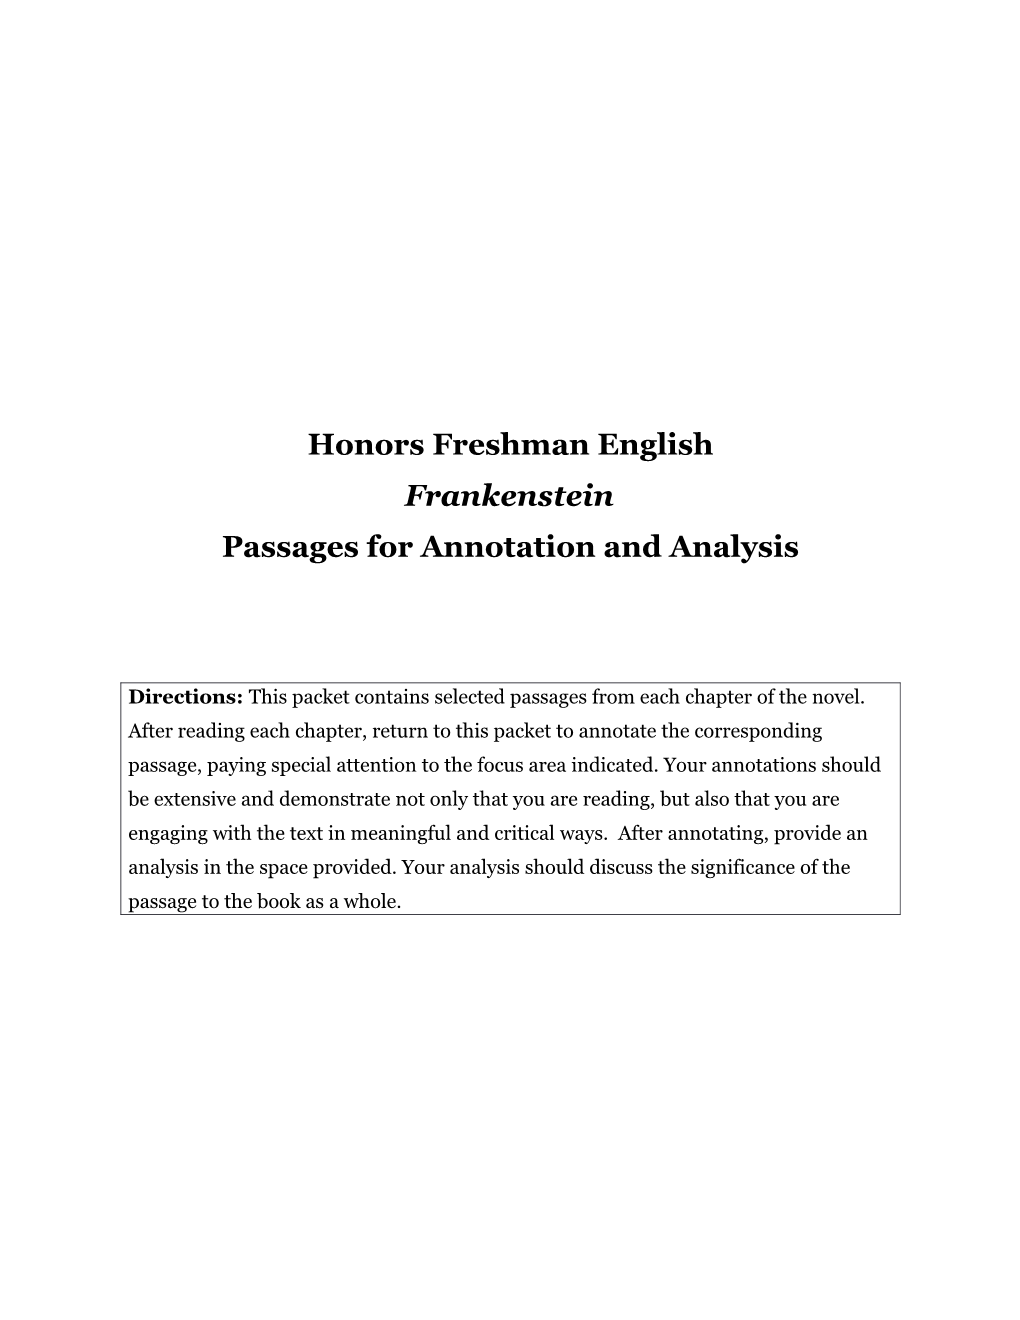 Passages for Annotation and Analysis